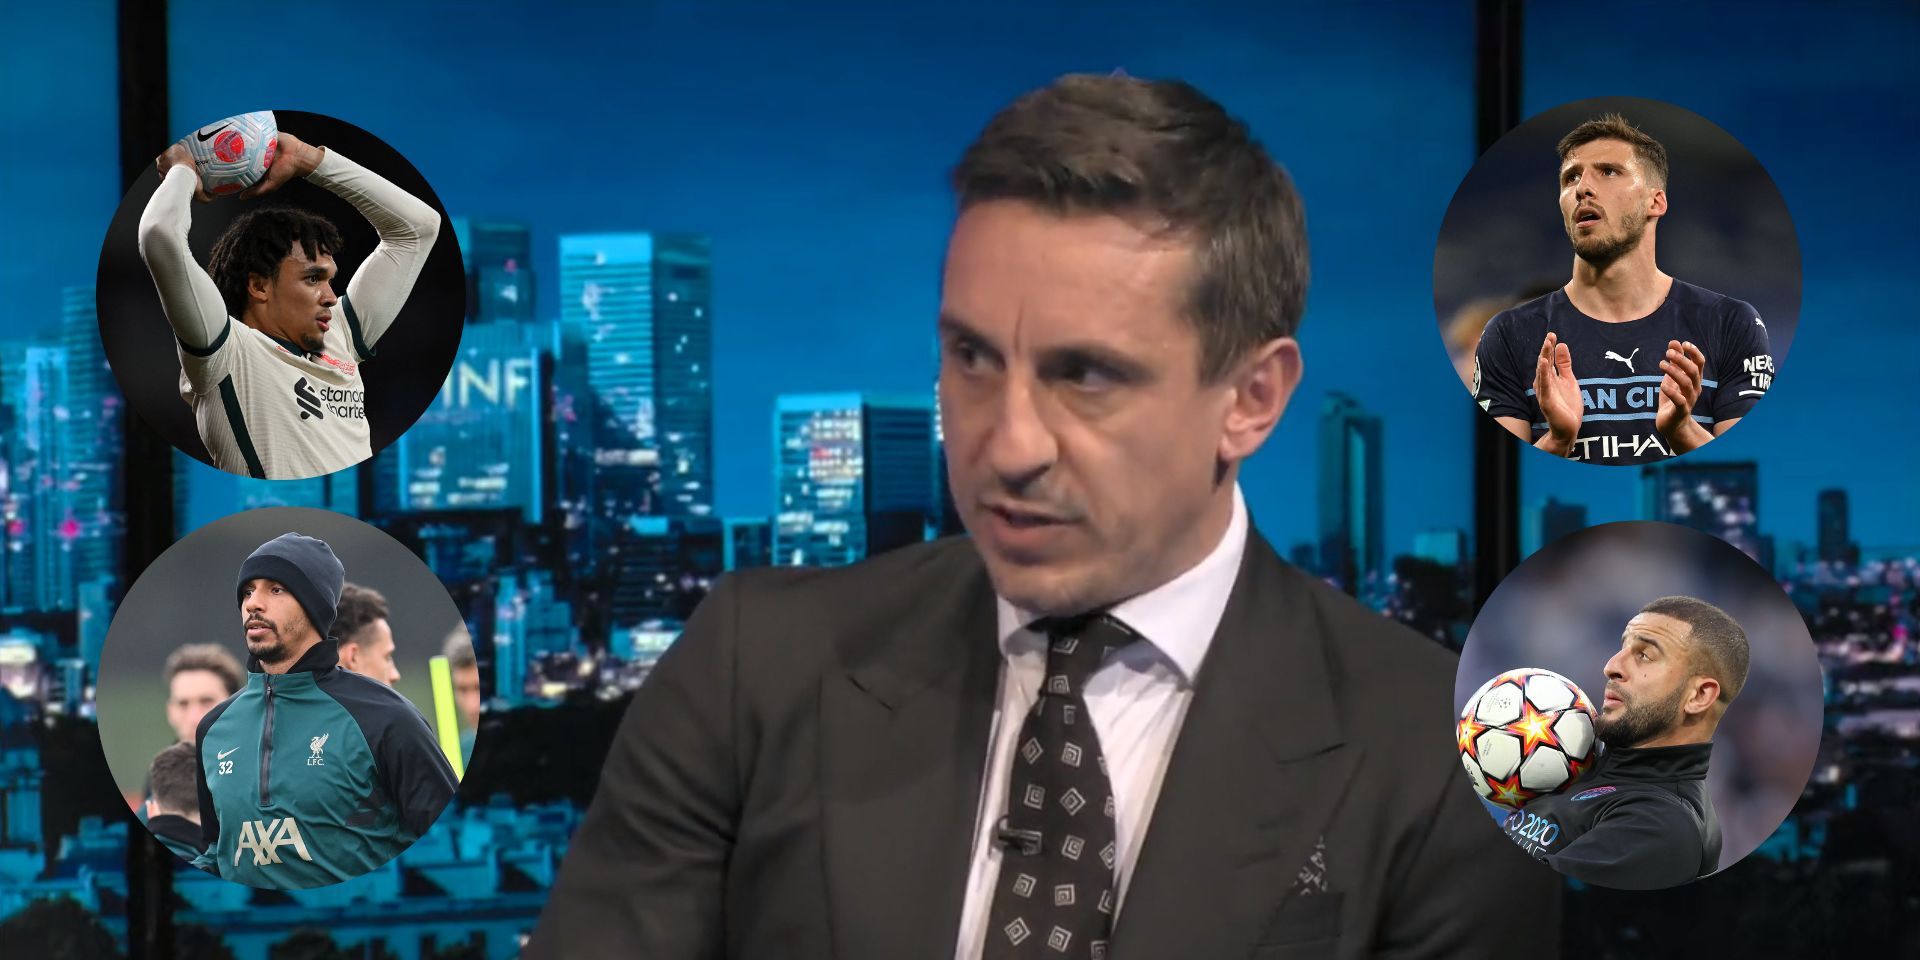 Gary Neville leaves Alexander-Arnold out of his PL team of the season & claims he’d prefer City duo v Real Madrid